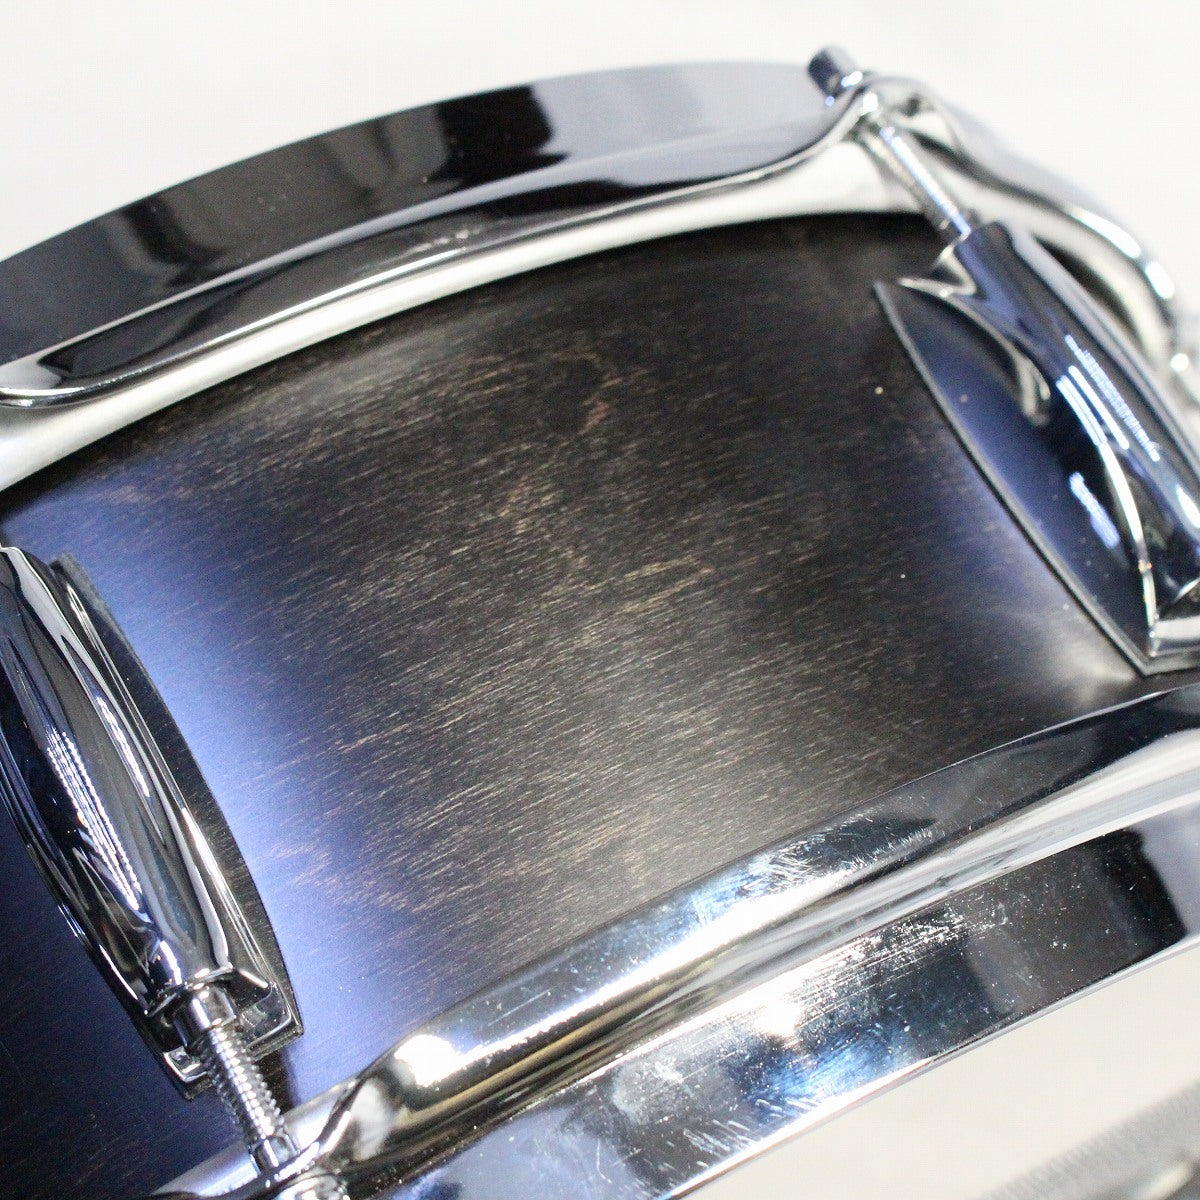 [SN 05801] USED GRETSCH / GKSL-0514S-8CL BROADKASTER 14x5 Gretsch Broadcaster Snare Drum [08]